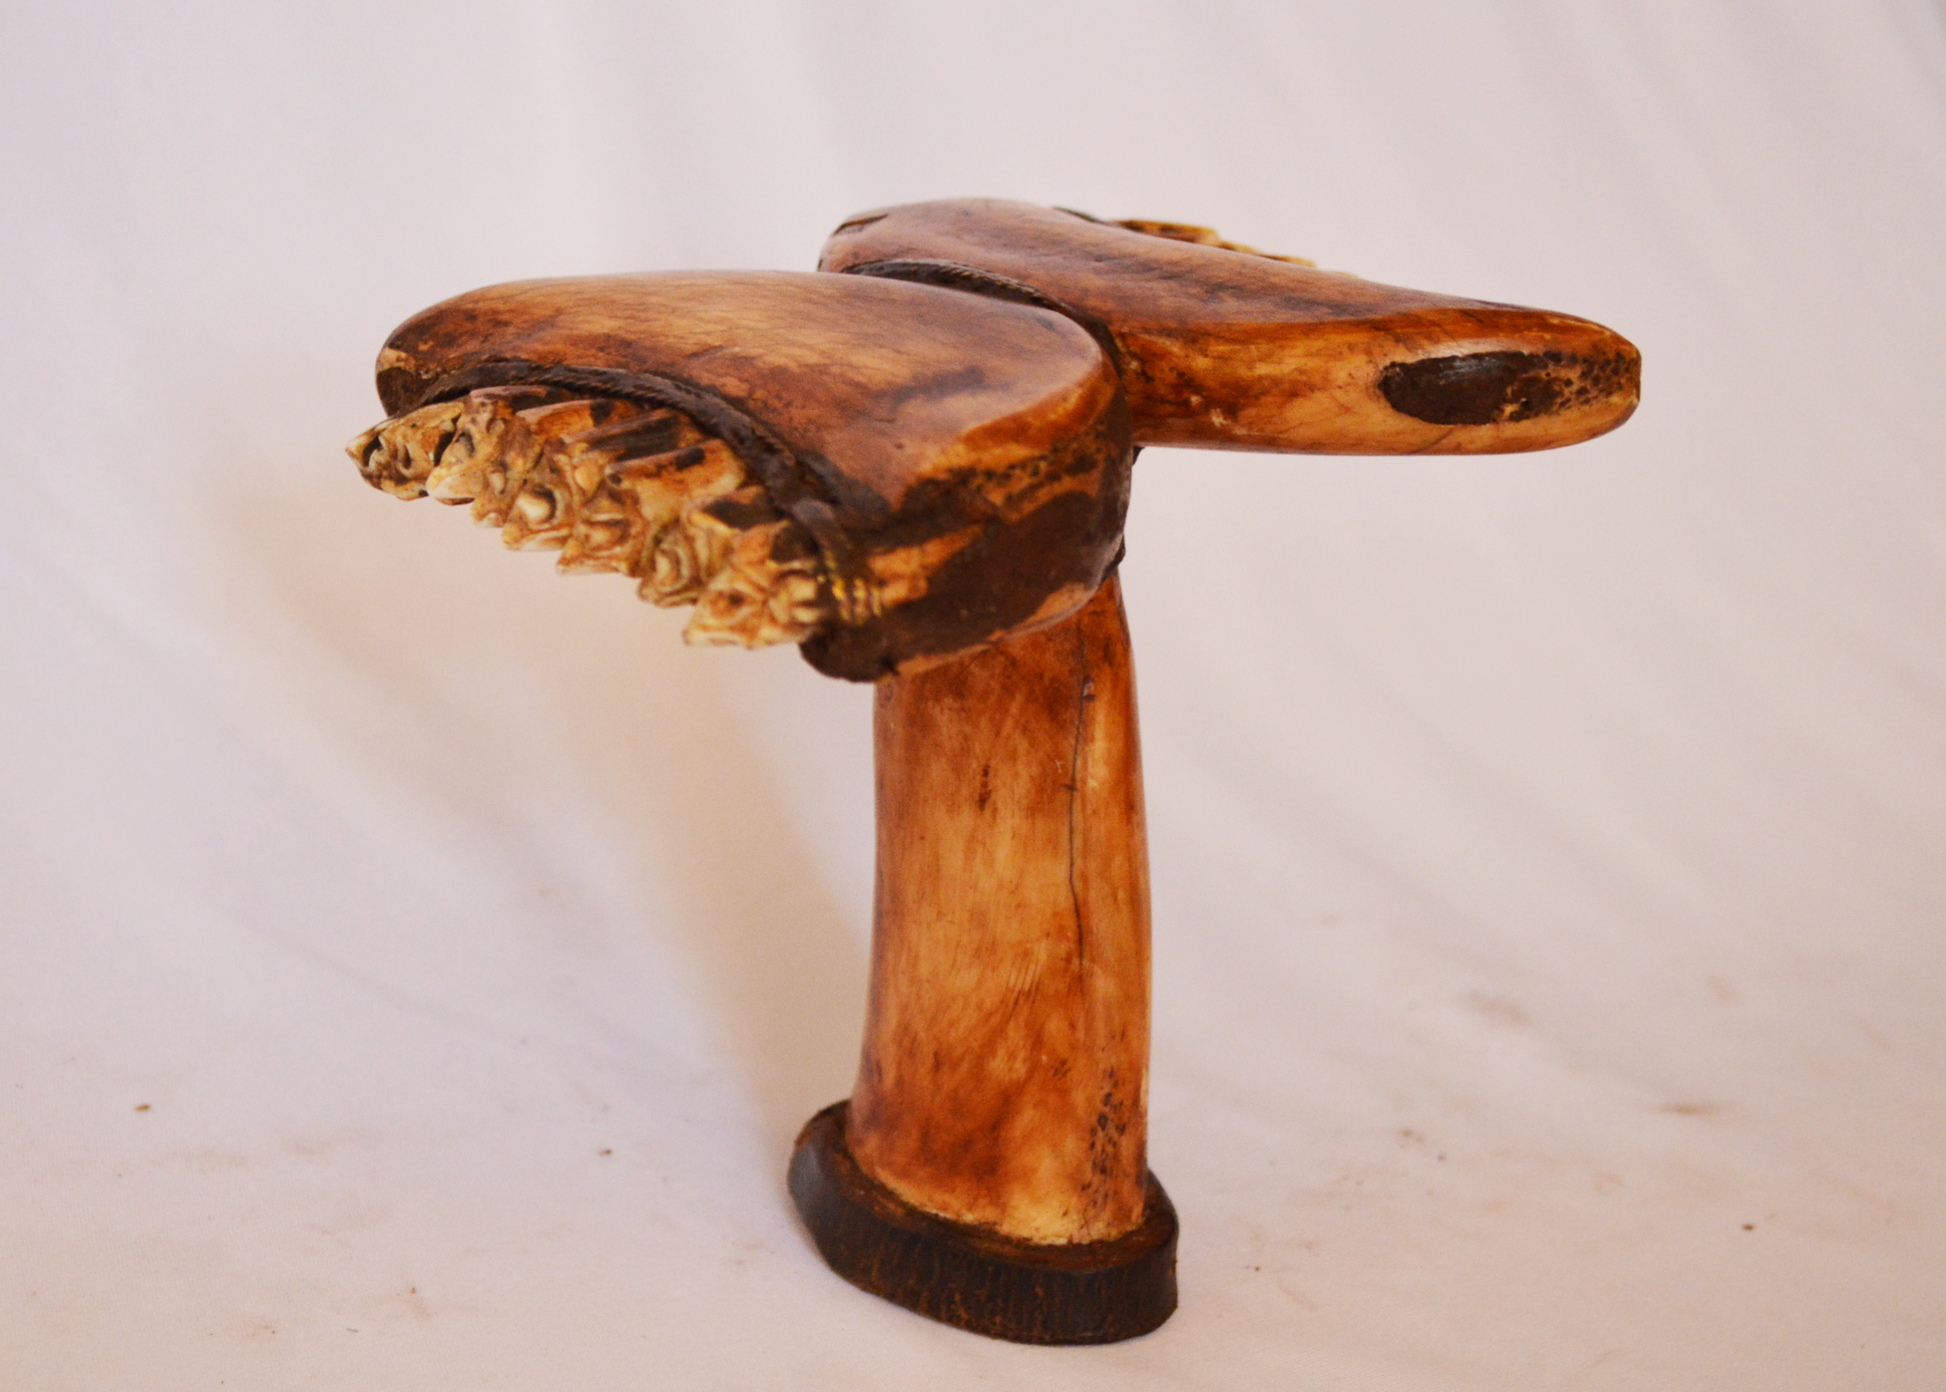 Toposa Bone Headrest - Authentic African handicrafts | Clothing, bags, painting, toys & more - CULTURE HUB by Muthoni Unchained